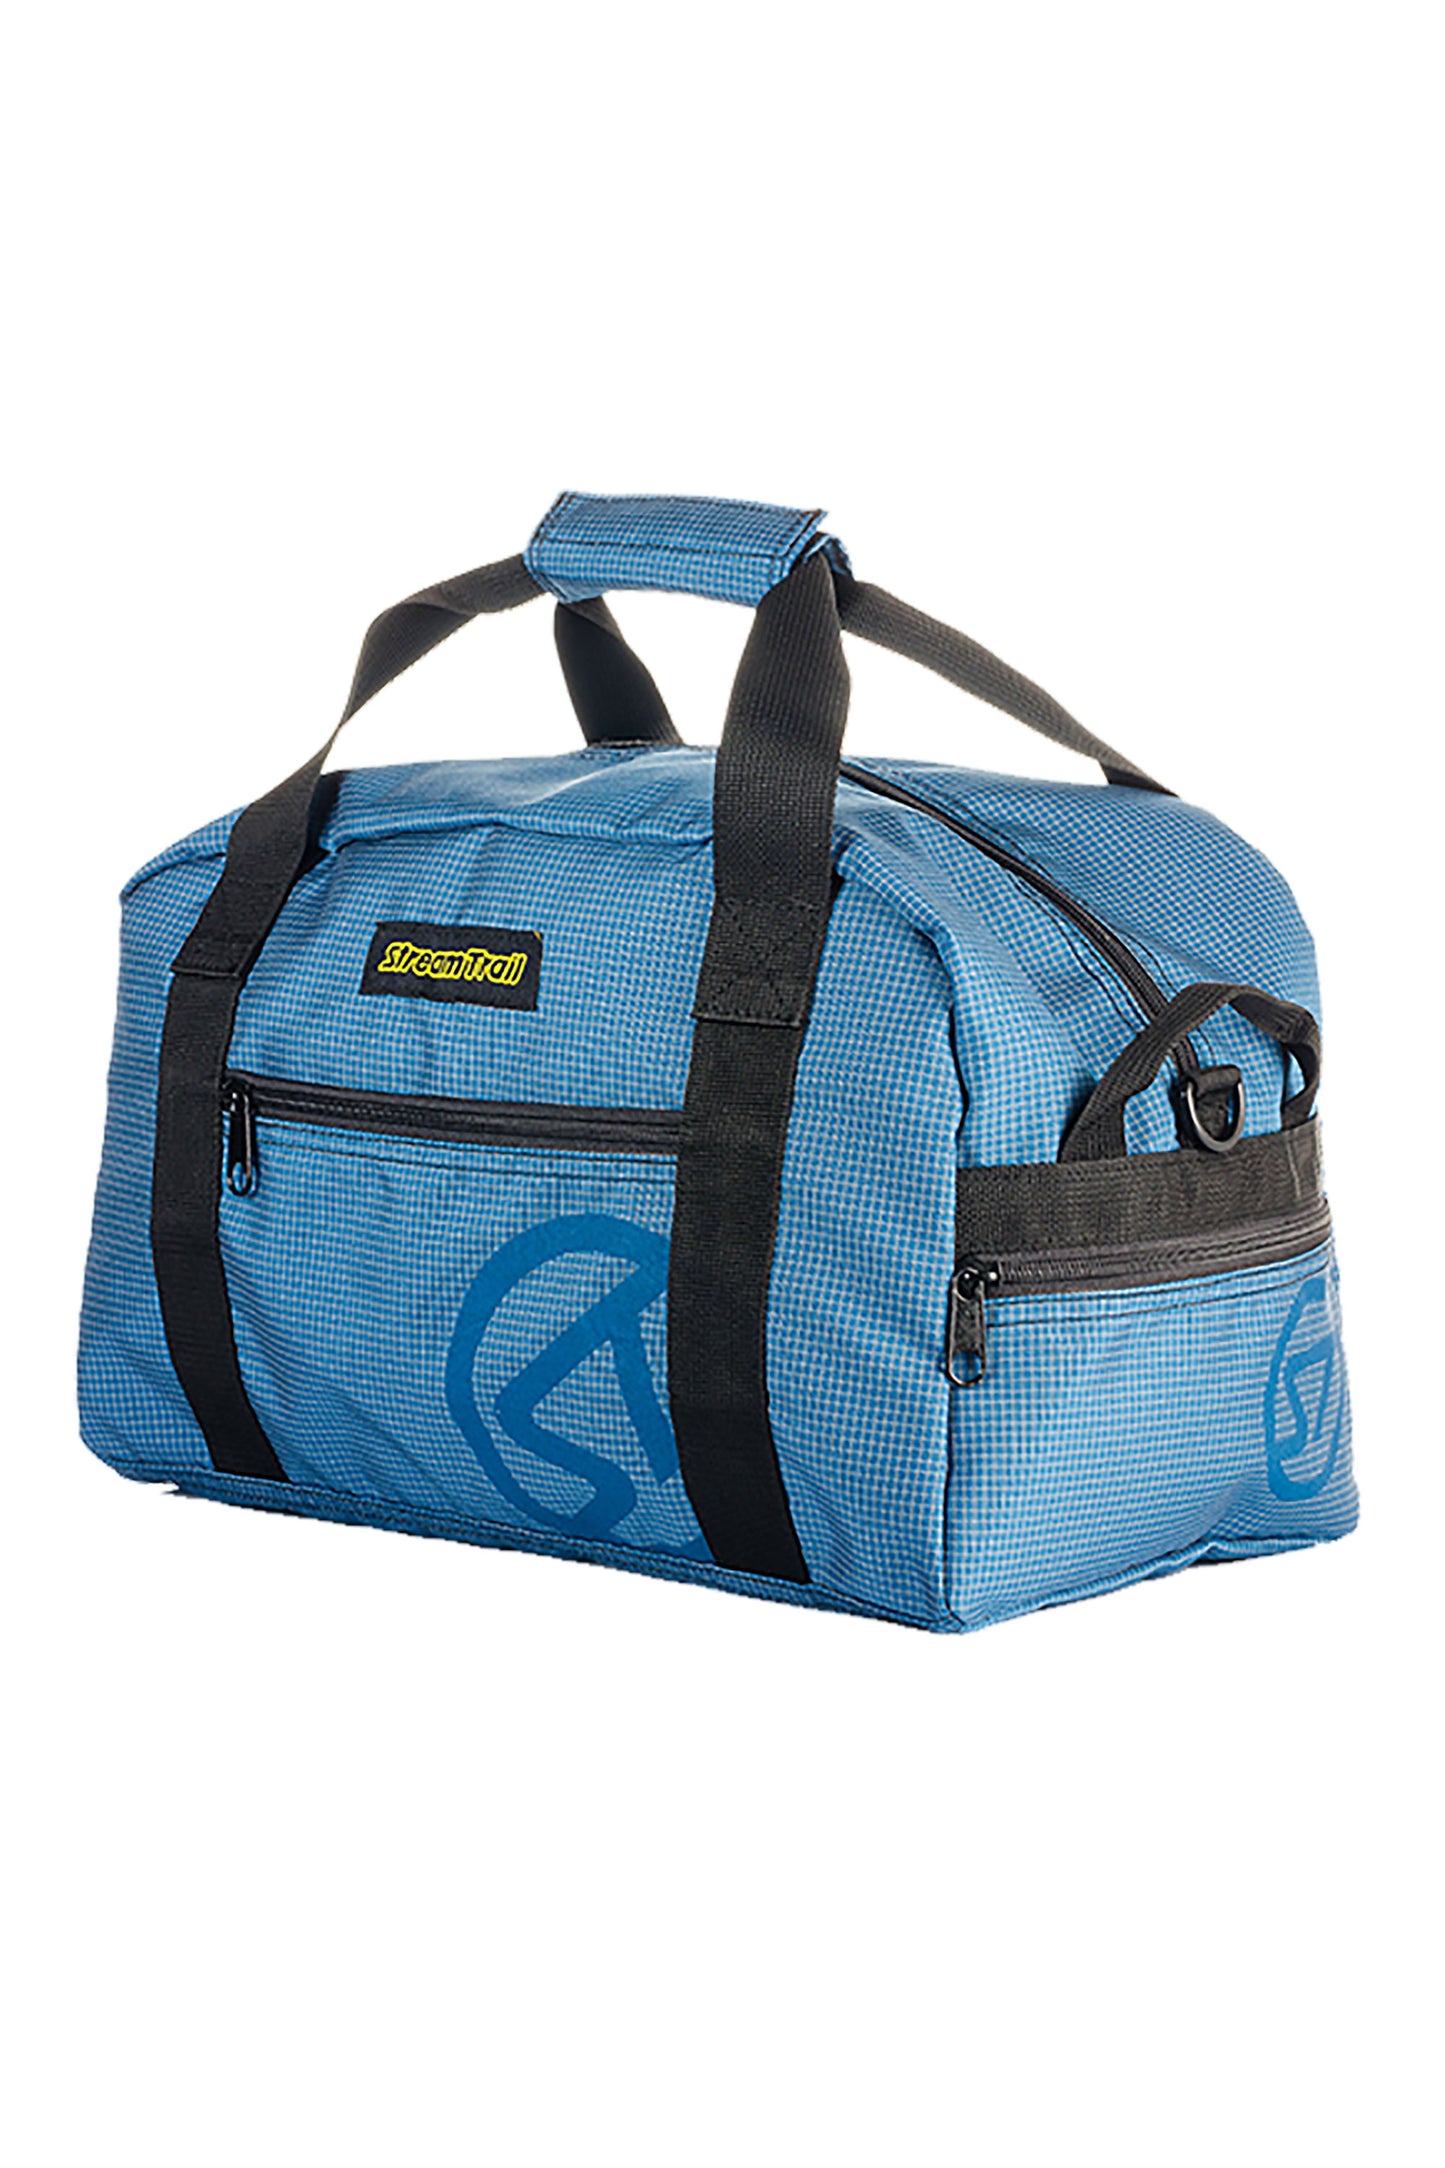 Outlet HAW Duffle Bag II S